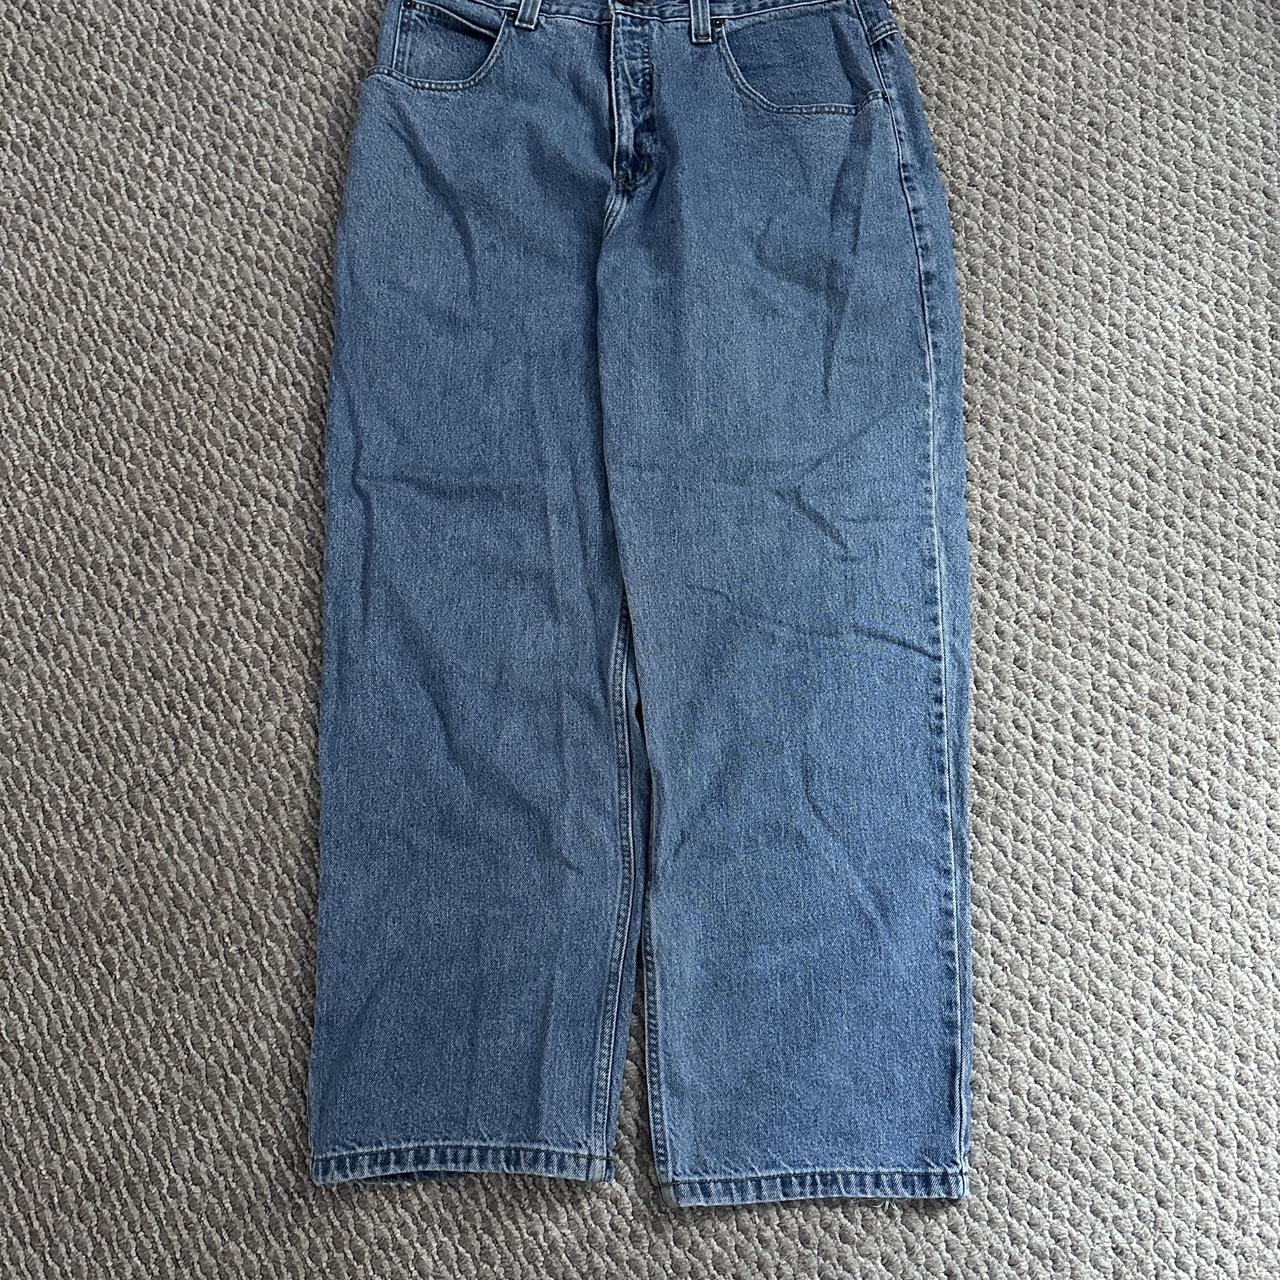 baggy asf anchor blue jeans, good quality denim and... - Depop